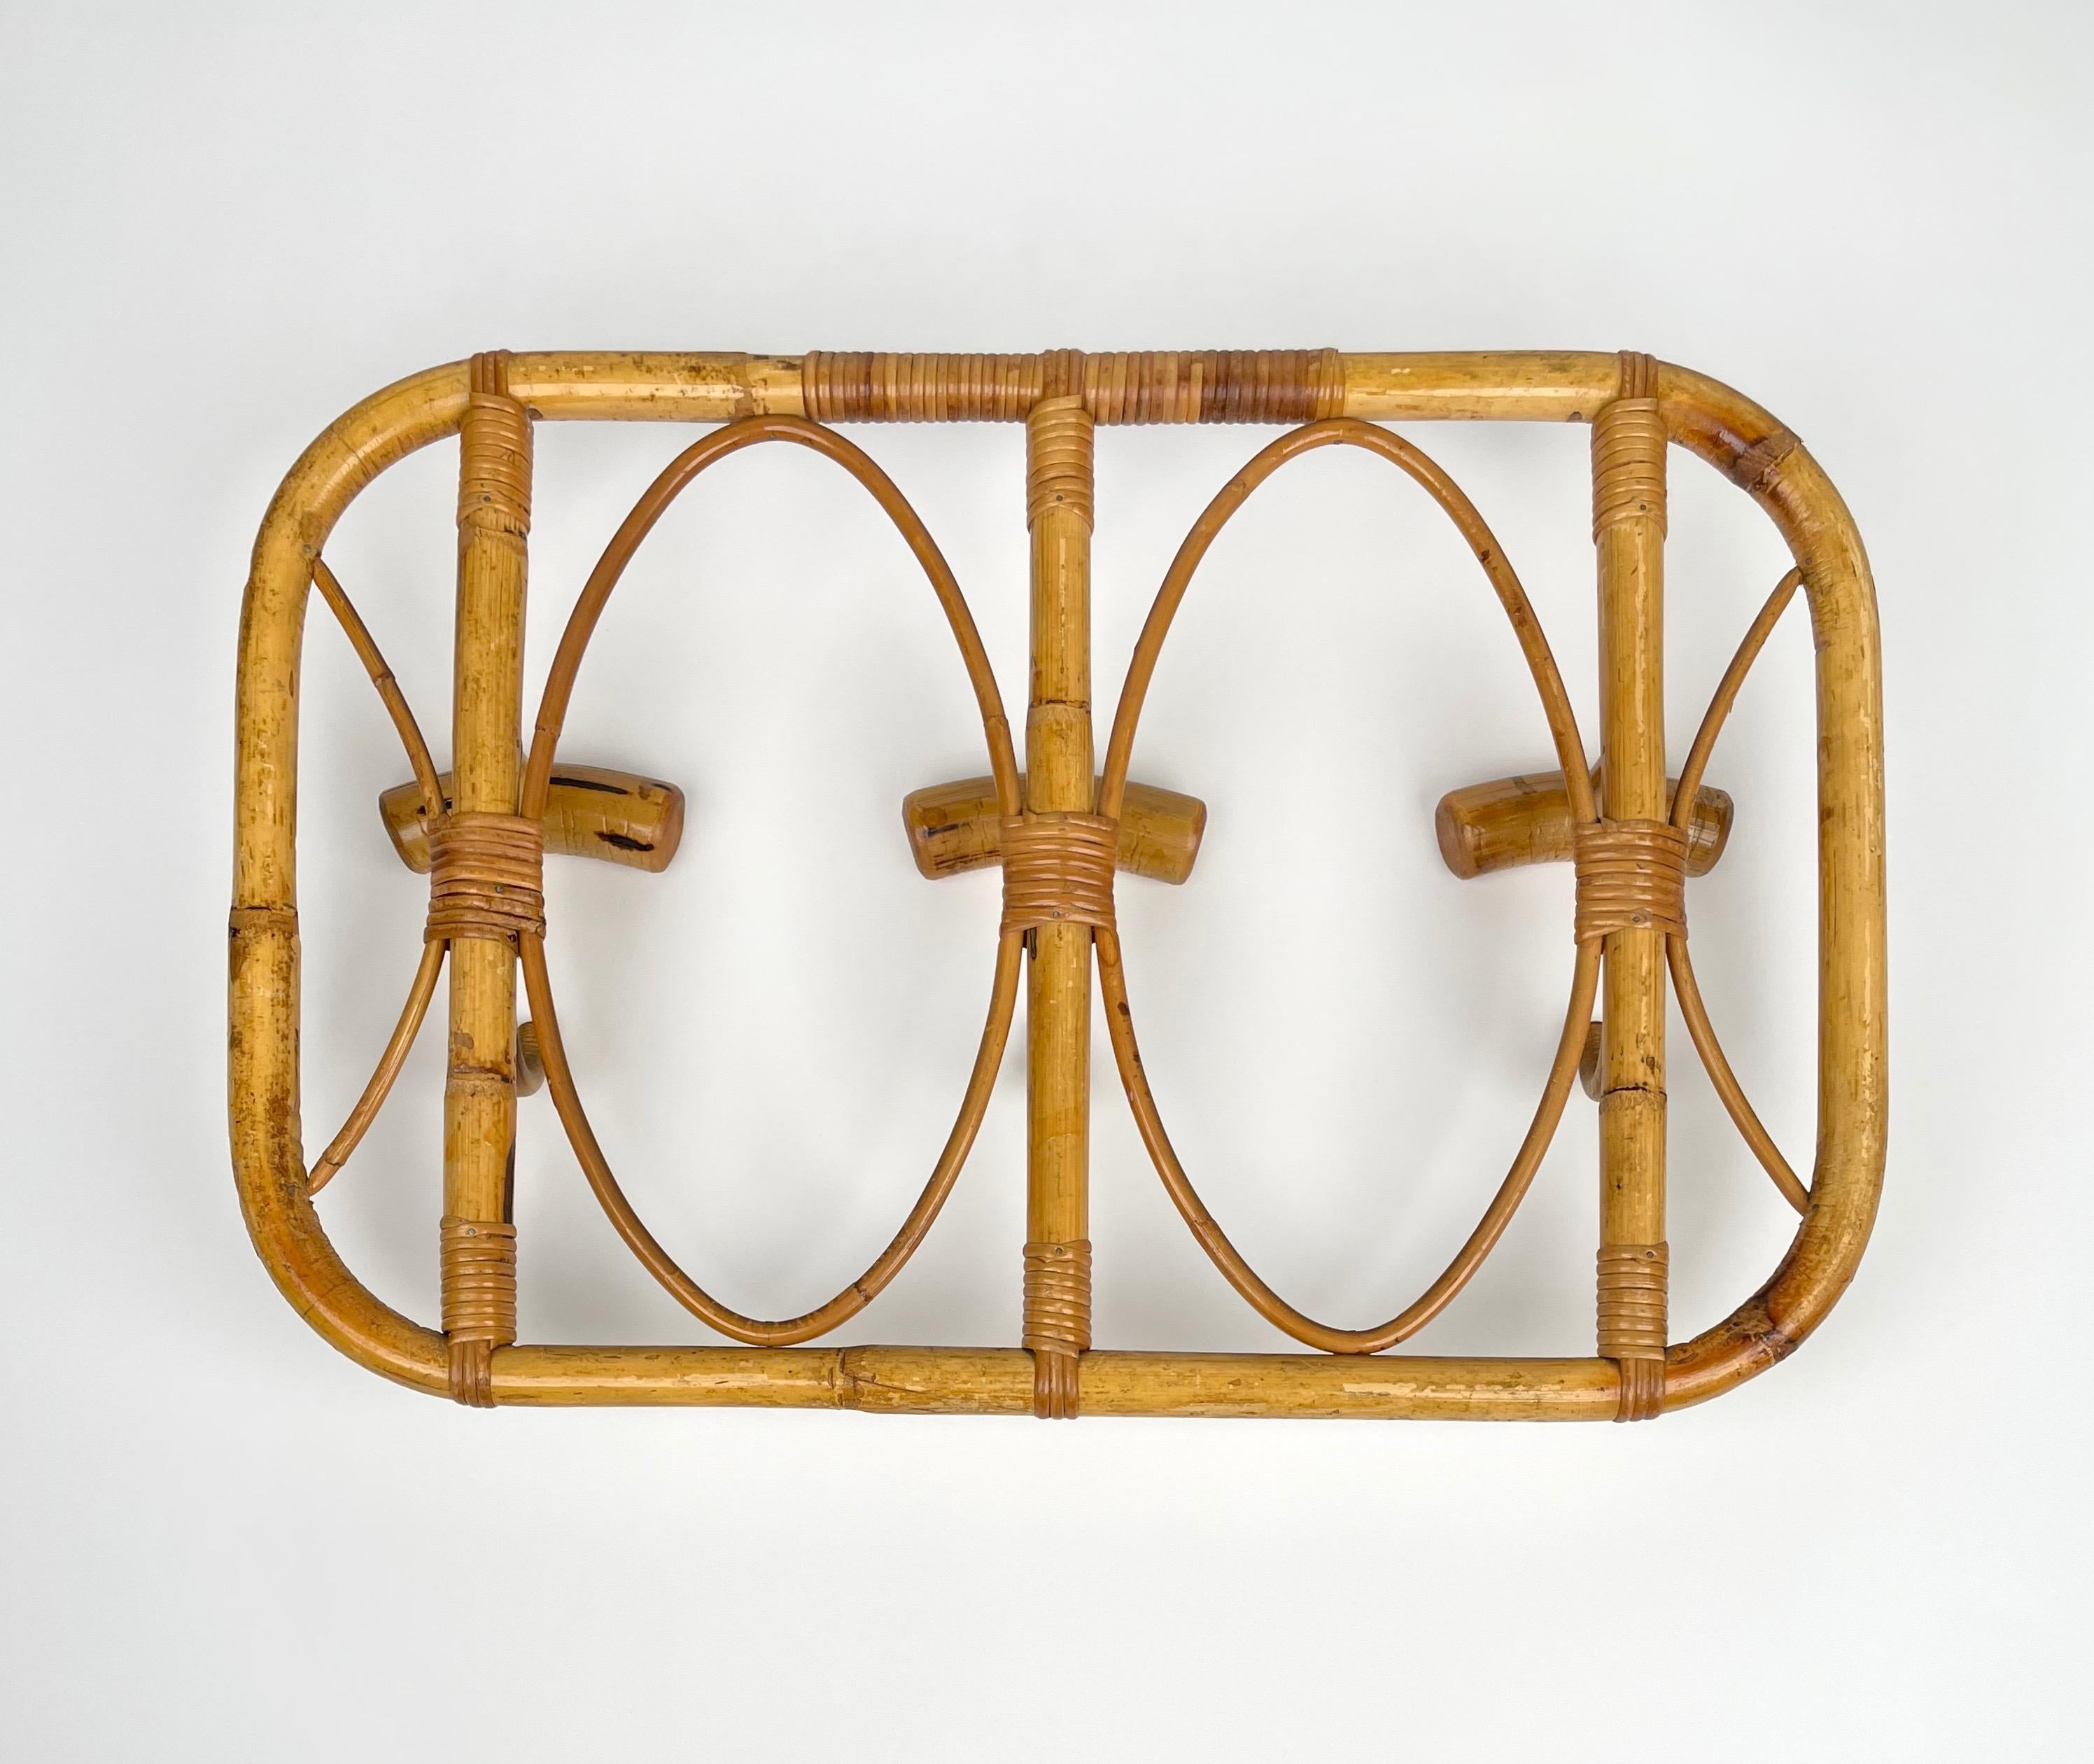 Midcentury Bamboo and Rattan Coat Rack, Italy 1960s For Sale 2